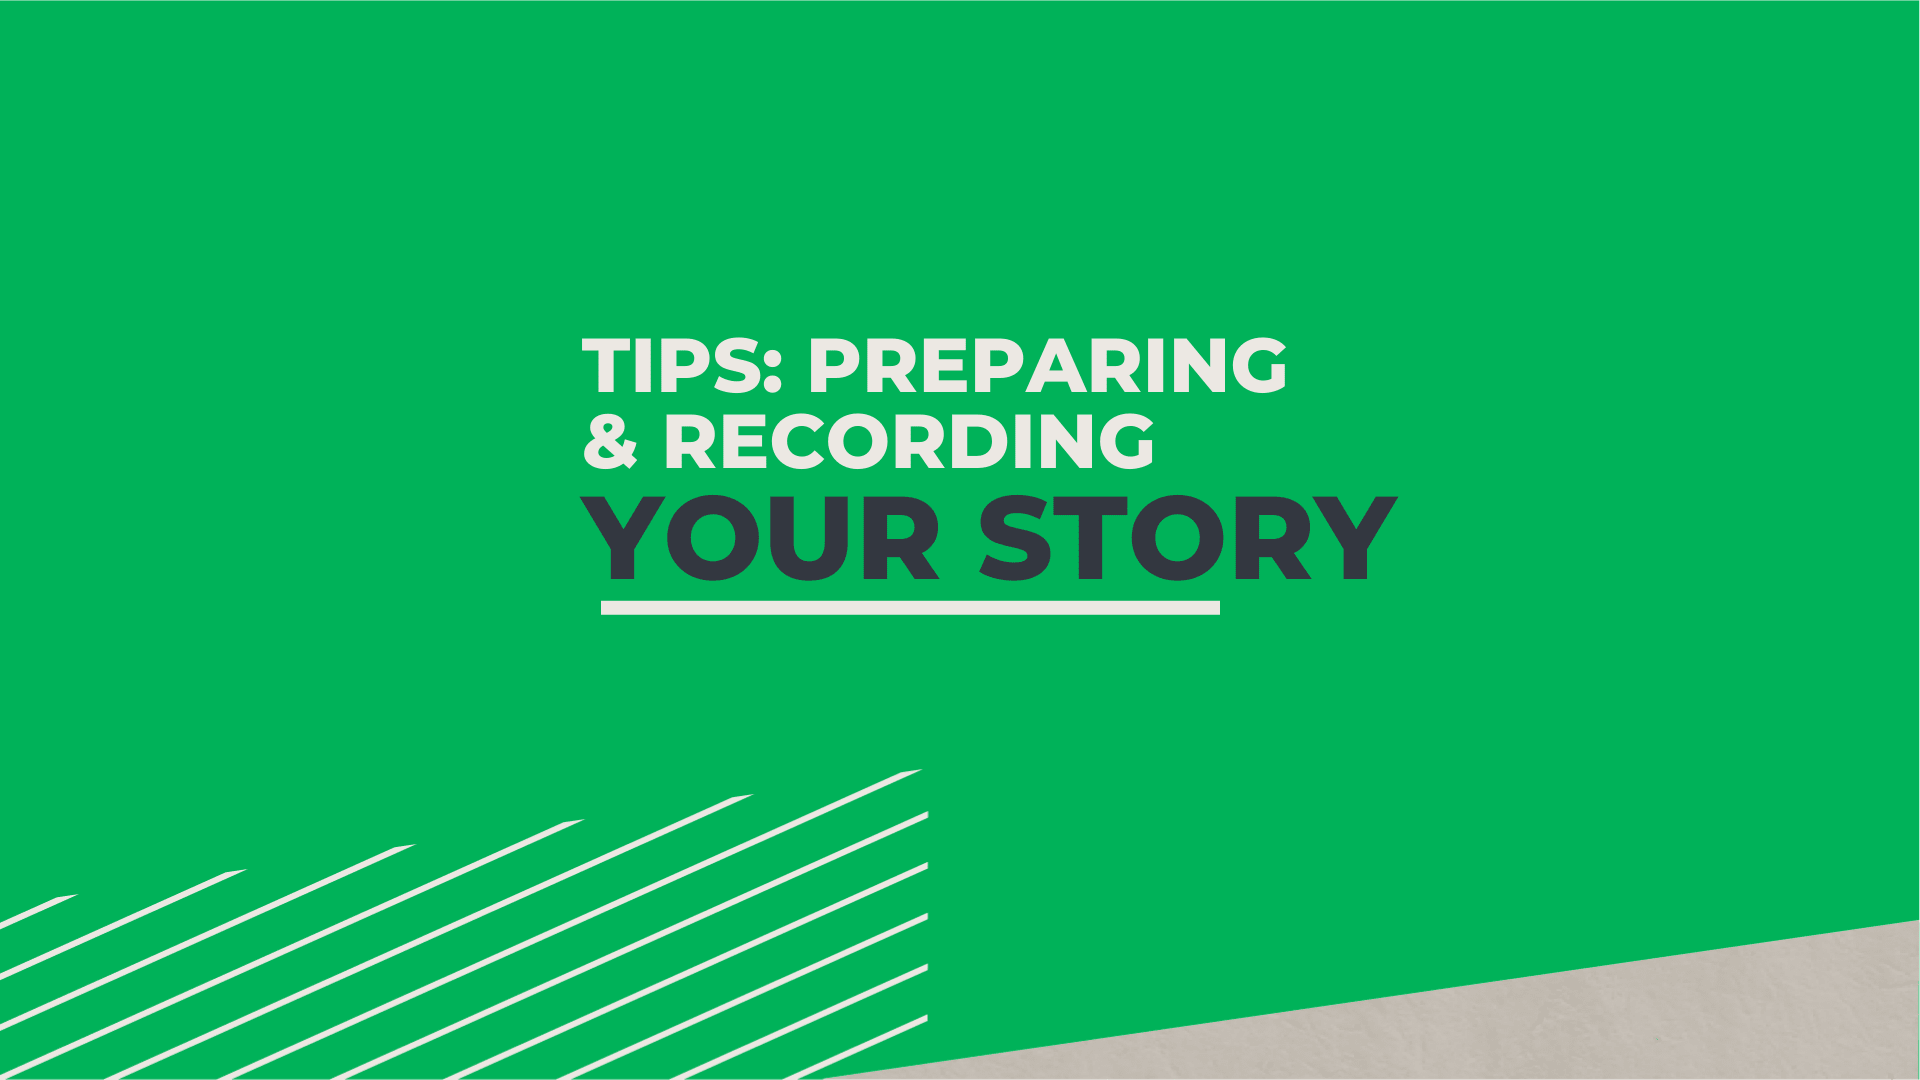 Tips for crafting your story